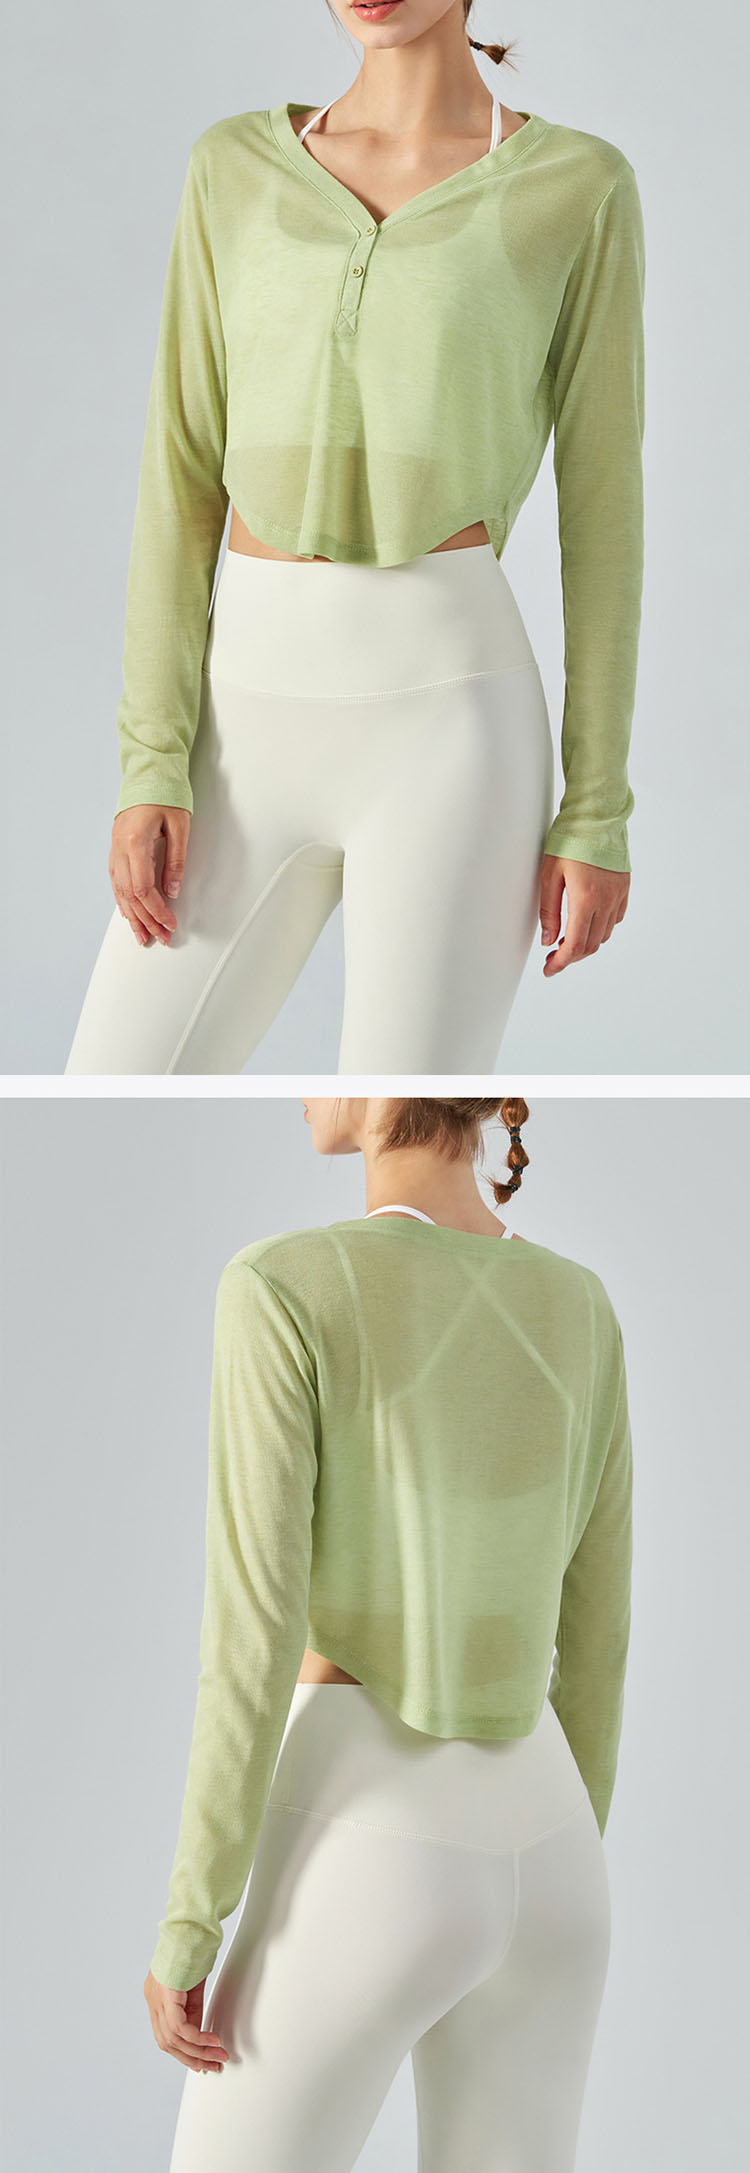 The arc hem design is adopted to cover the waist and abdomen and show the waist curve